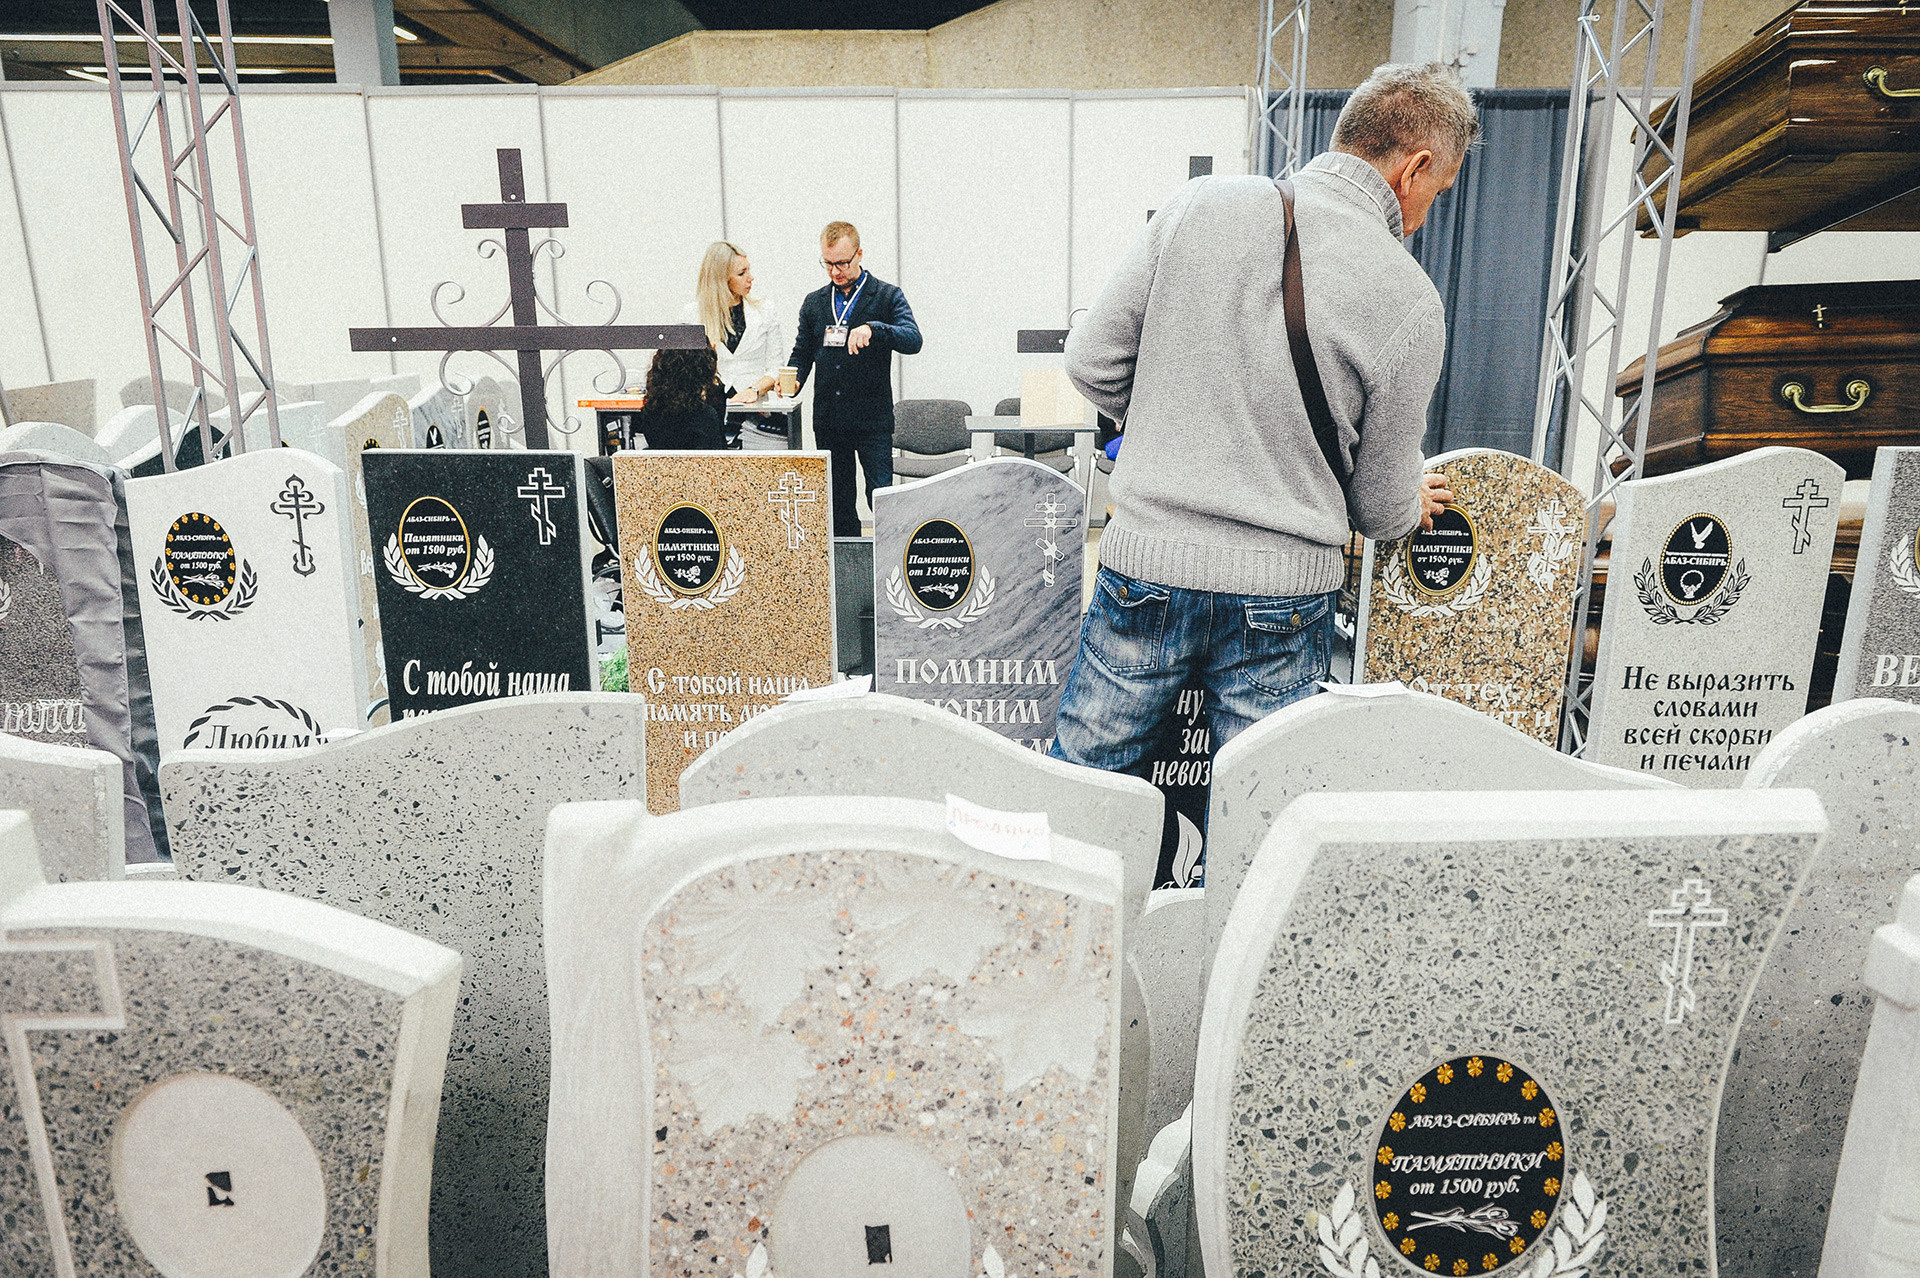 Tombstones on display at a funeral home shop